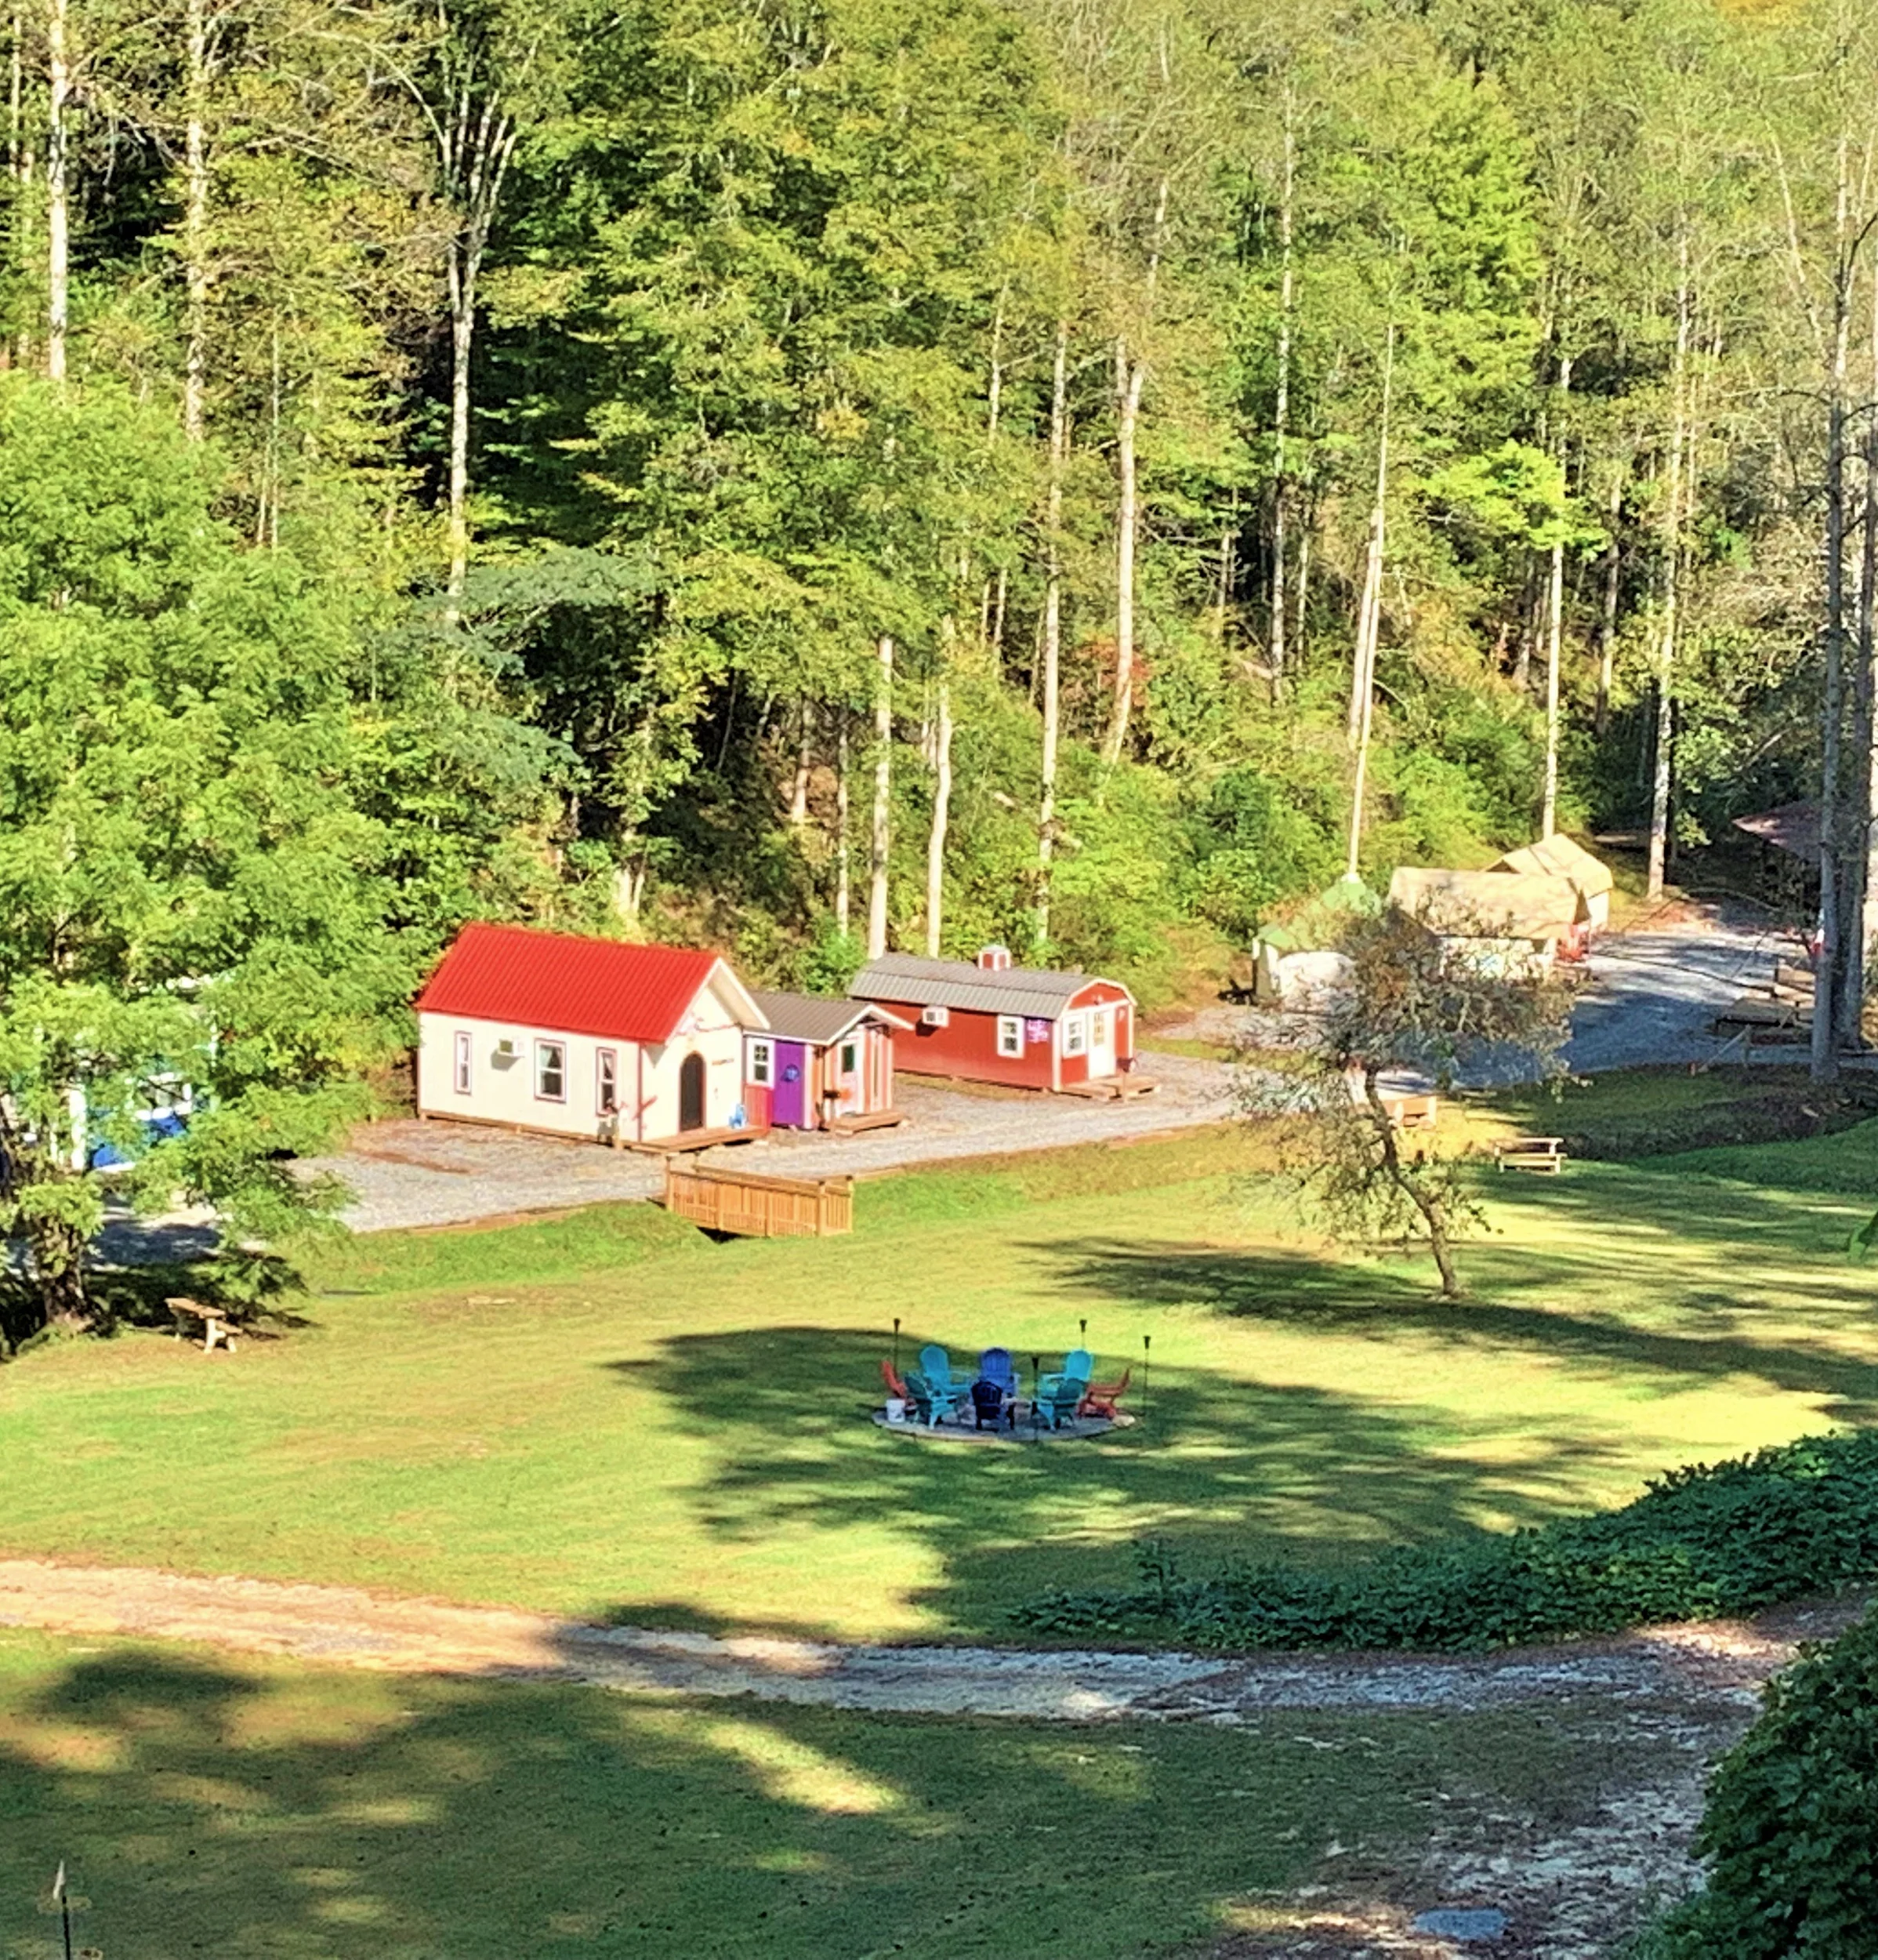 View of lower half of Gorgeous Stays Campground